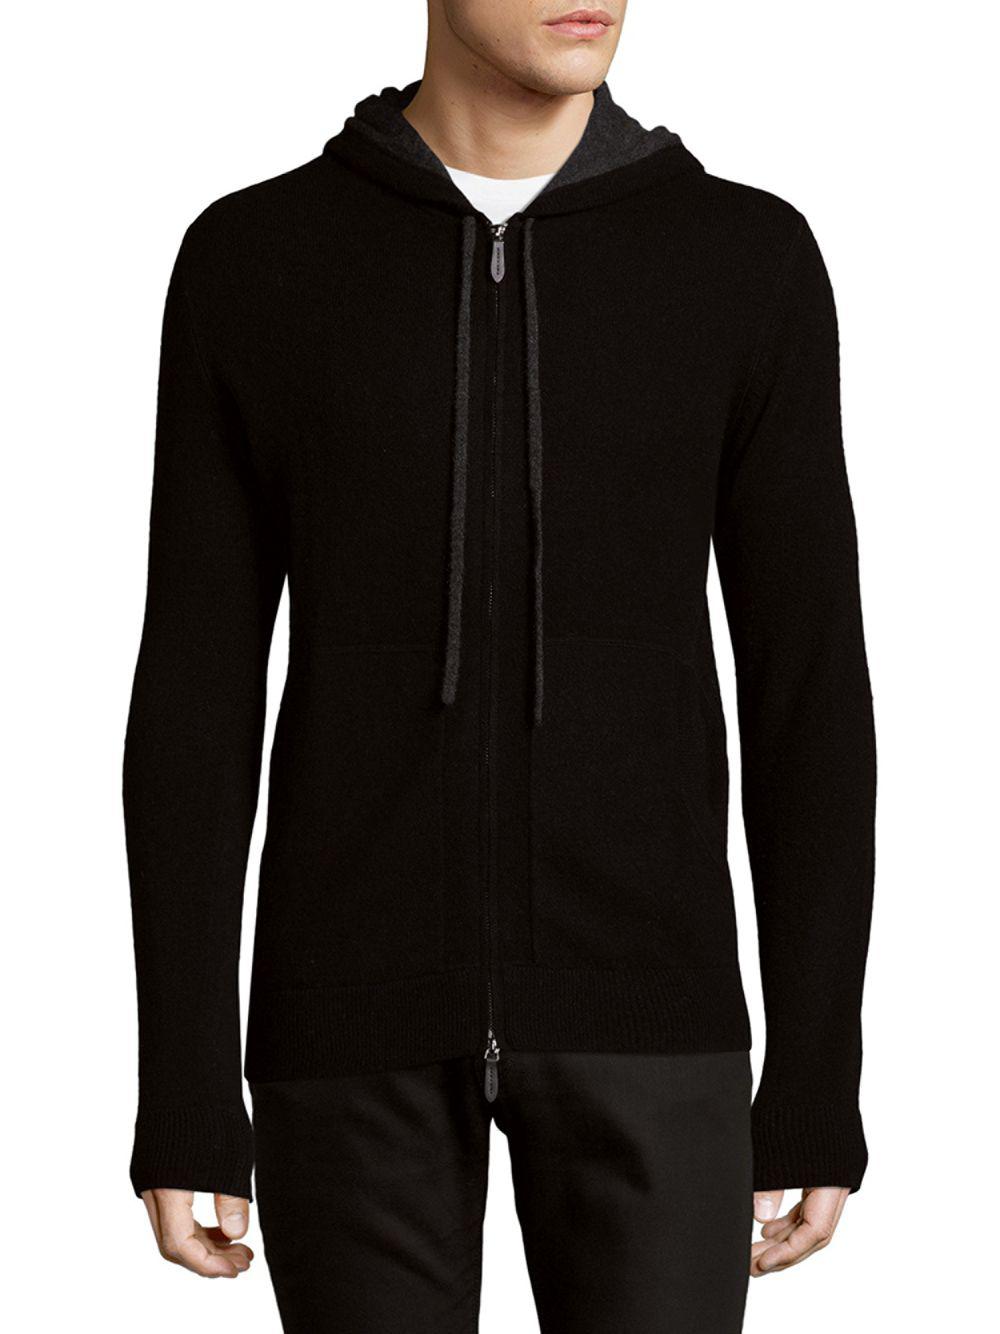 Saks Fifth Avenue Long-sleeve Cashmere Hoodie in Black for Men - Lyst